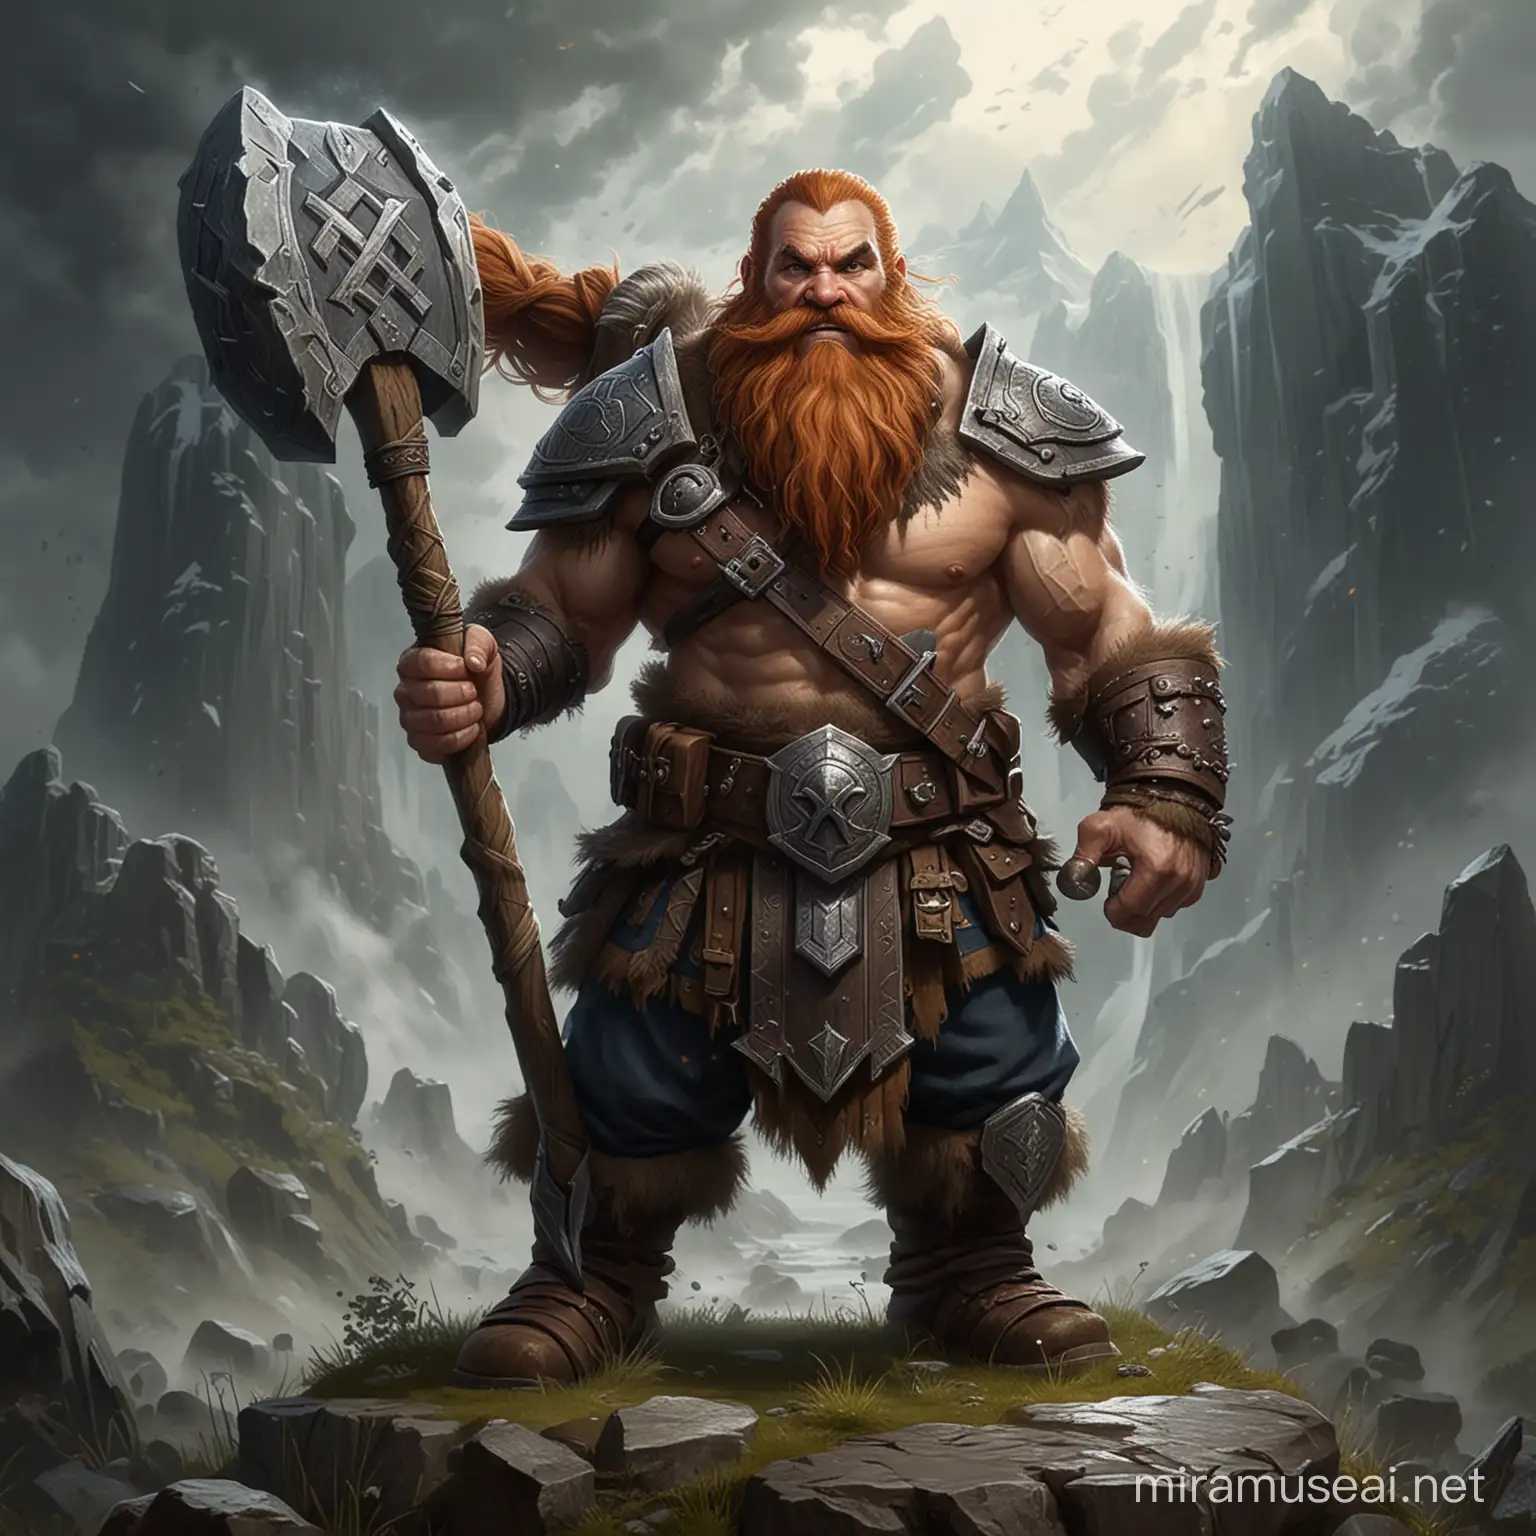 dwarf warrior that uses giant rune magic to grow in size when raging, and wields a runic maul